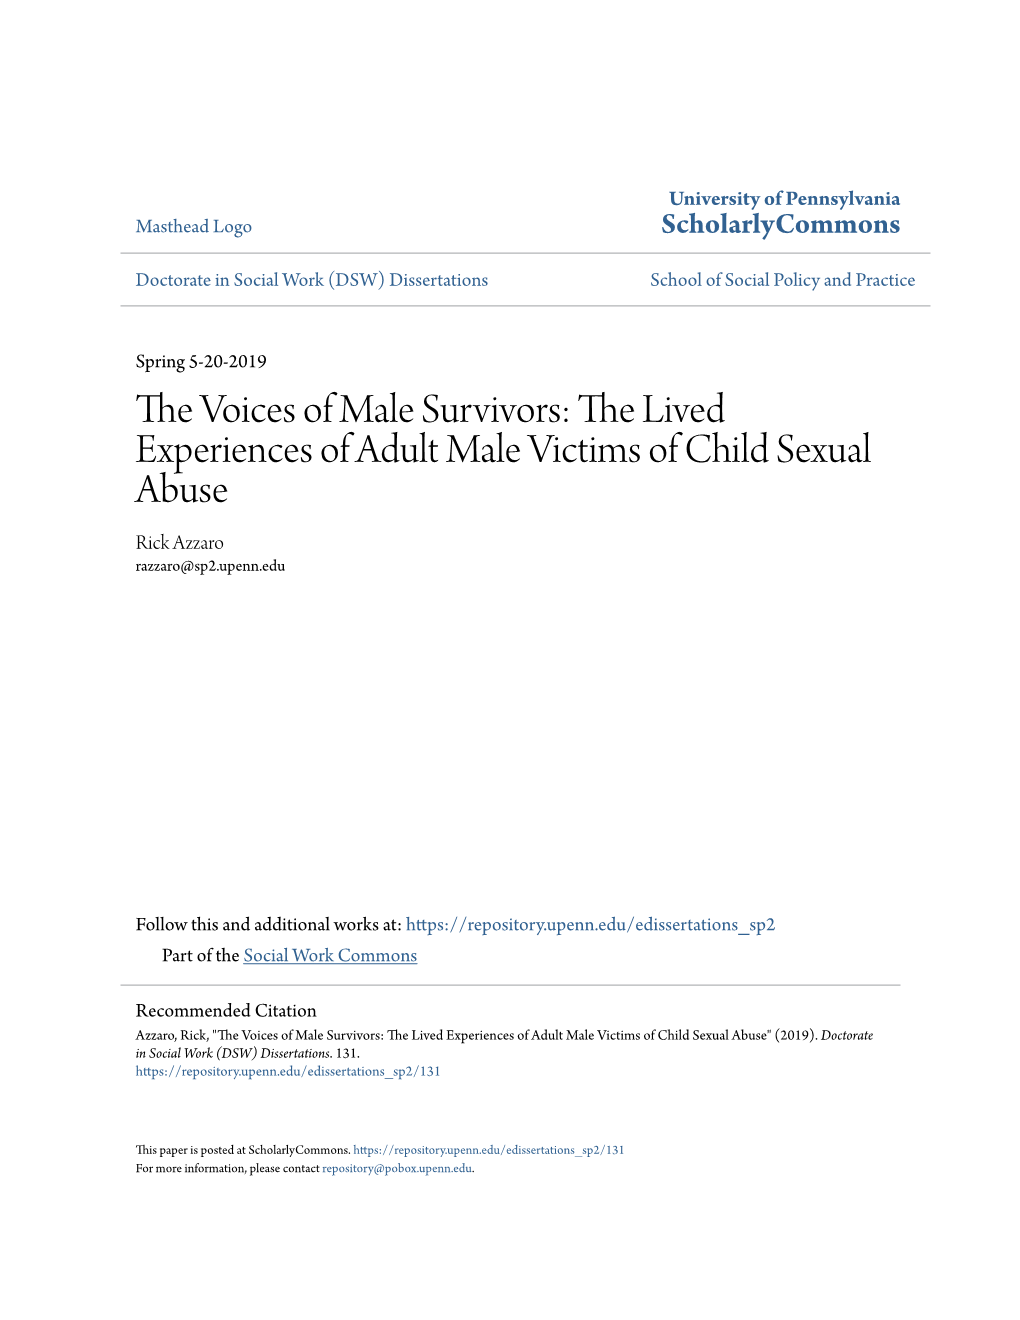 The Voices of Male Survivors: the Lived Experiences of Adult Male Victims of Child Sexual Abuse